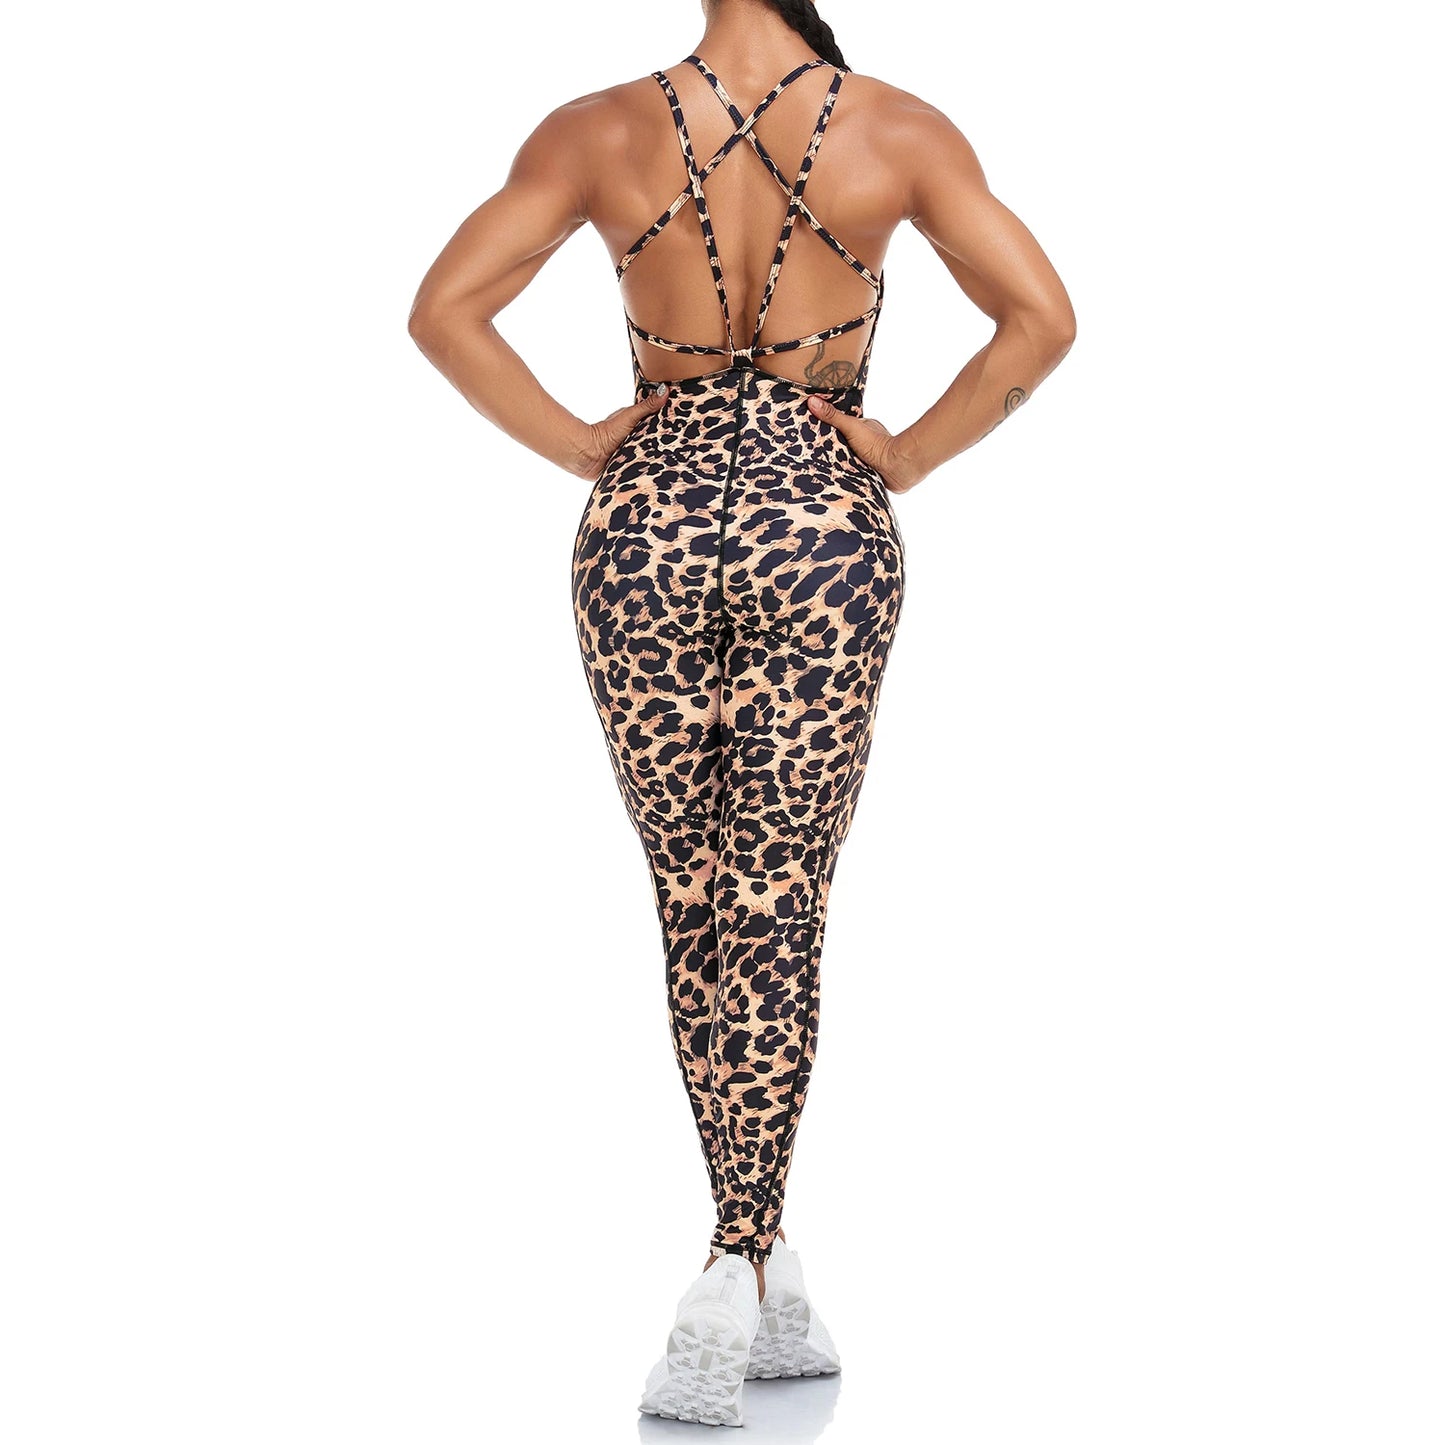 Big Lift Fitness Leopard Print Jumpsuit with Crossover Straps